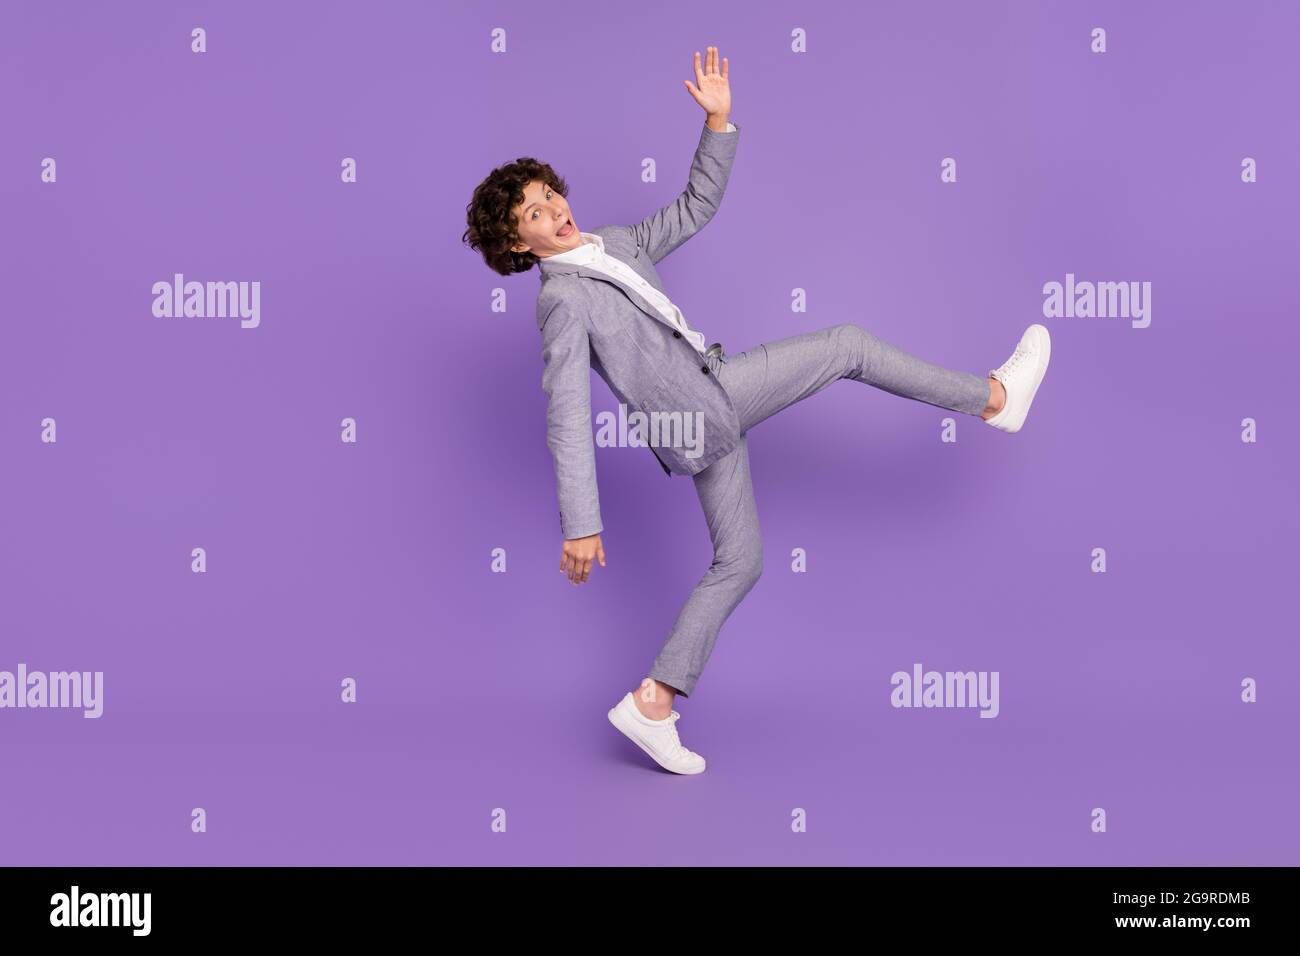 Boy playing on velcro sticky wall in colorful suit Stock Photo - Alamy